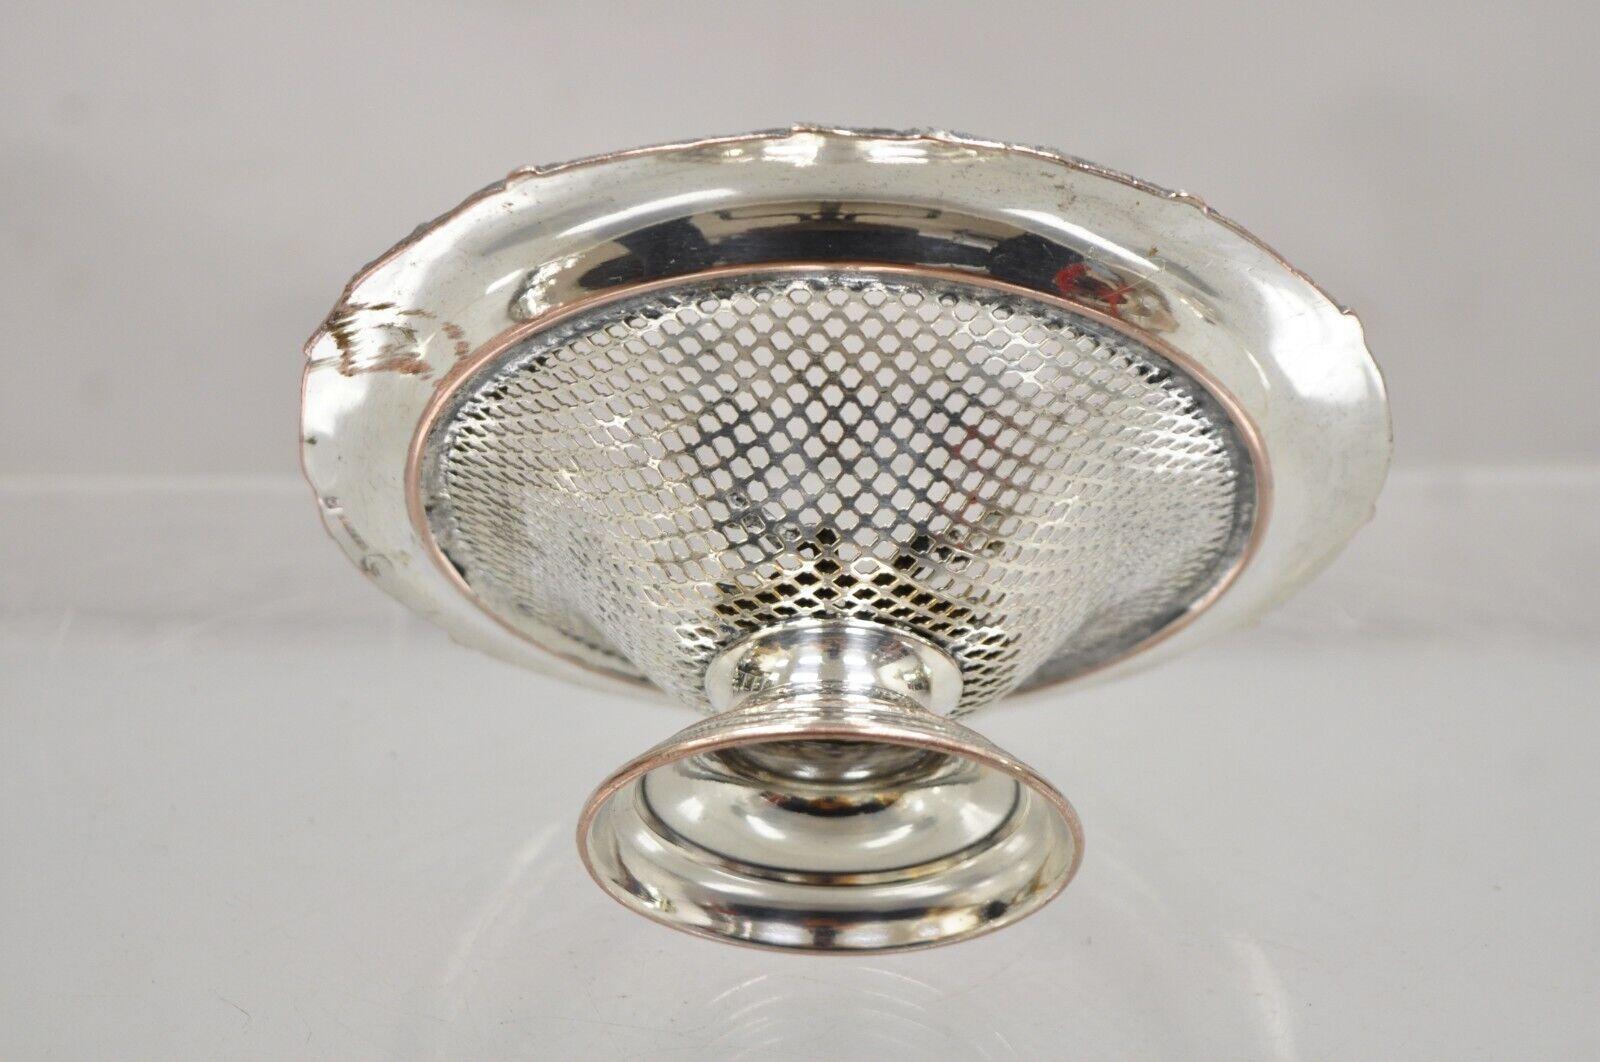 English Edwardian Silver Plated Wreath Design Small Mesh Basket Candy Dish -Pair For Sale 6